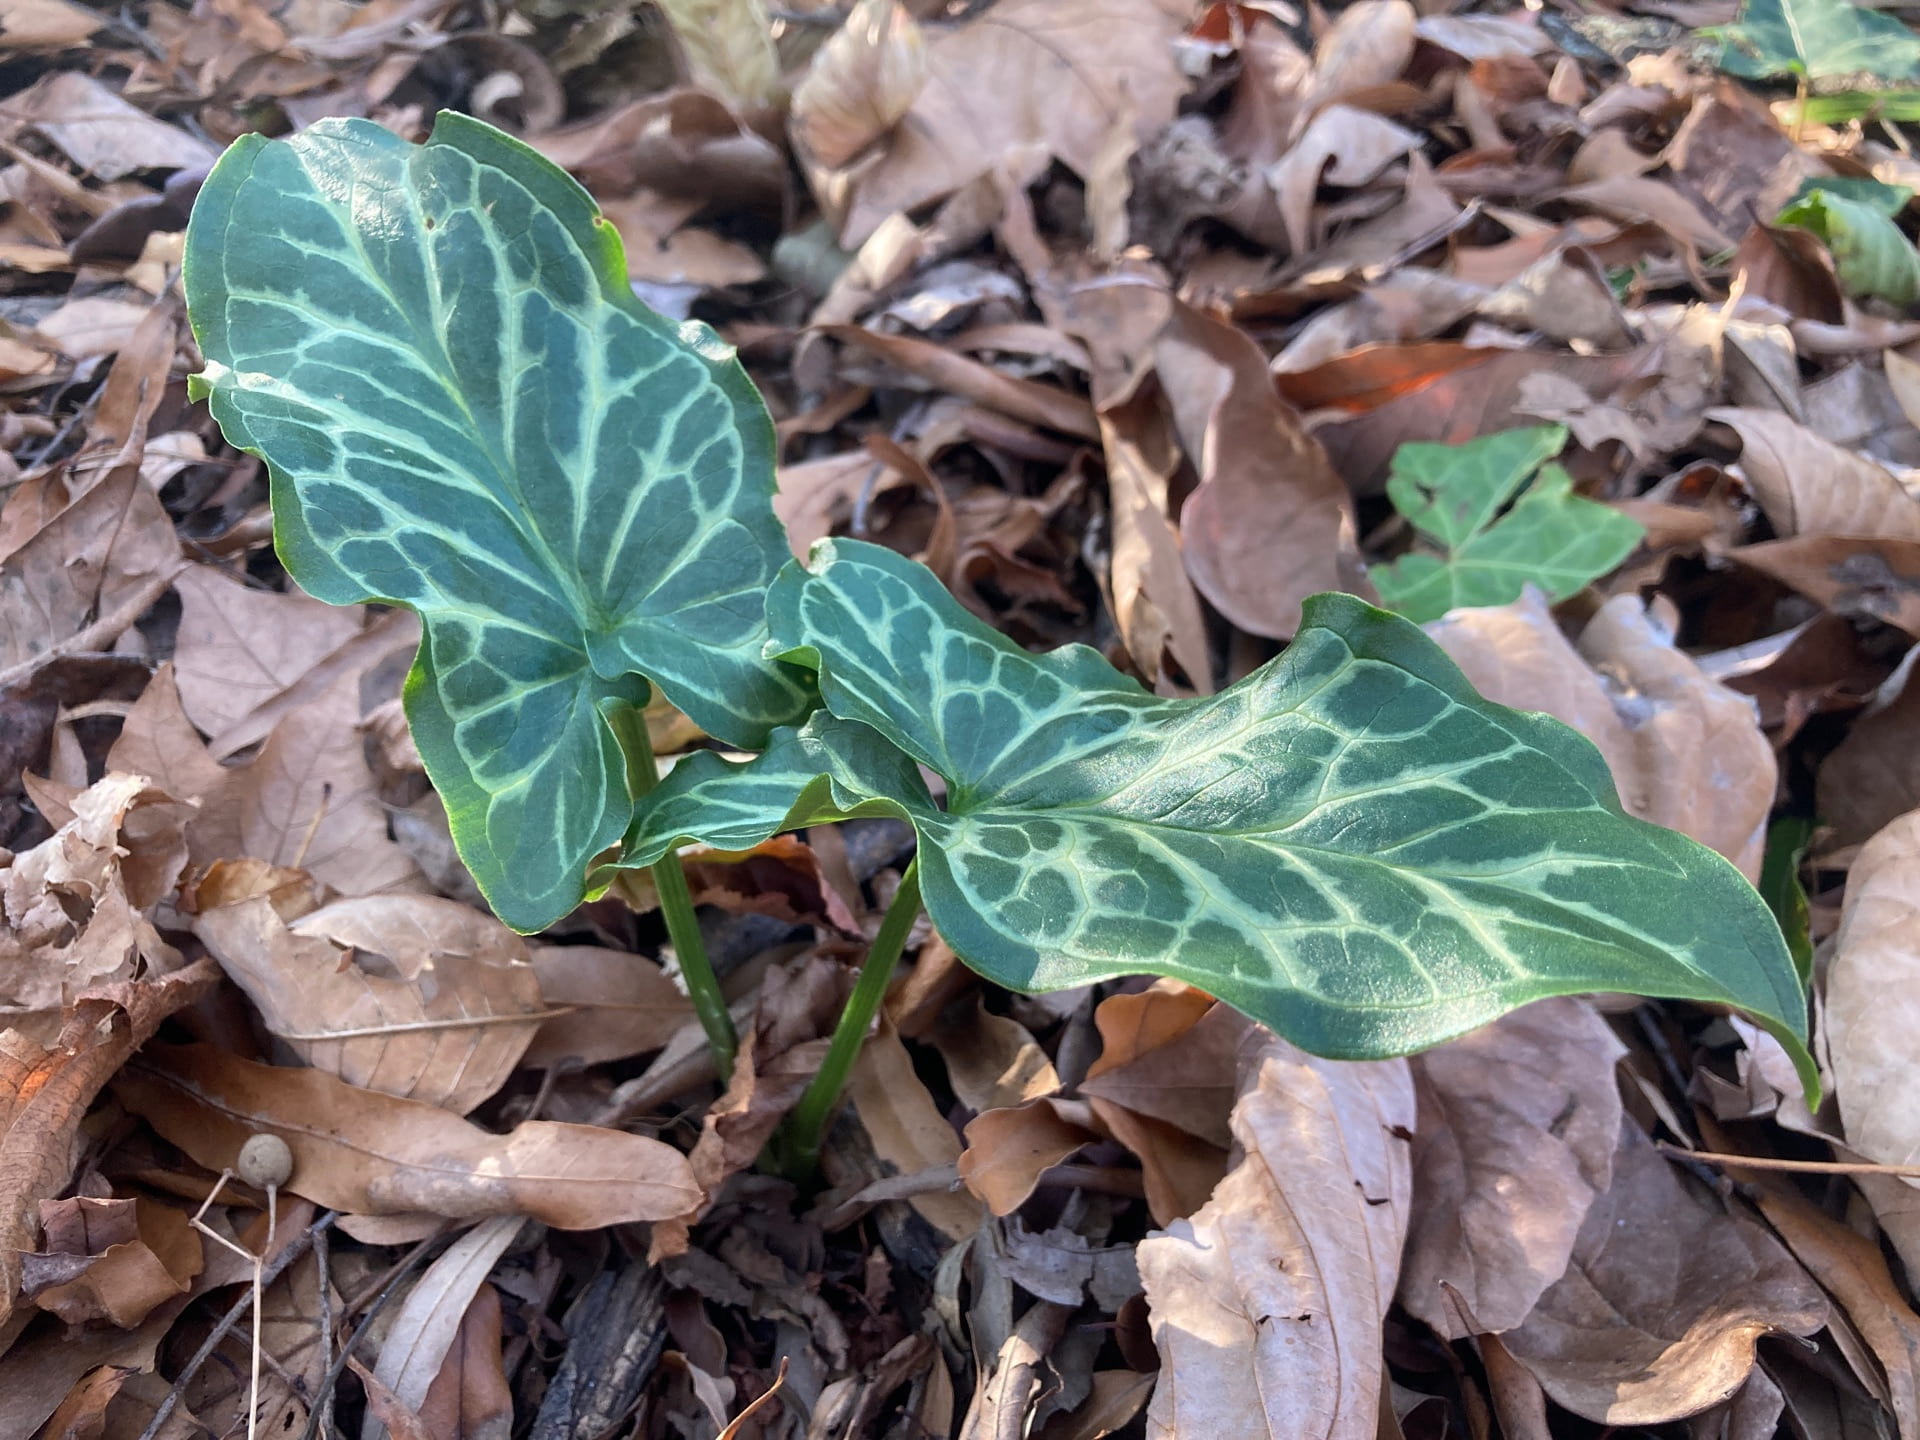 While most other plants leaves are falling off, Arum italicum foliage is just emerging!